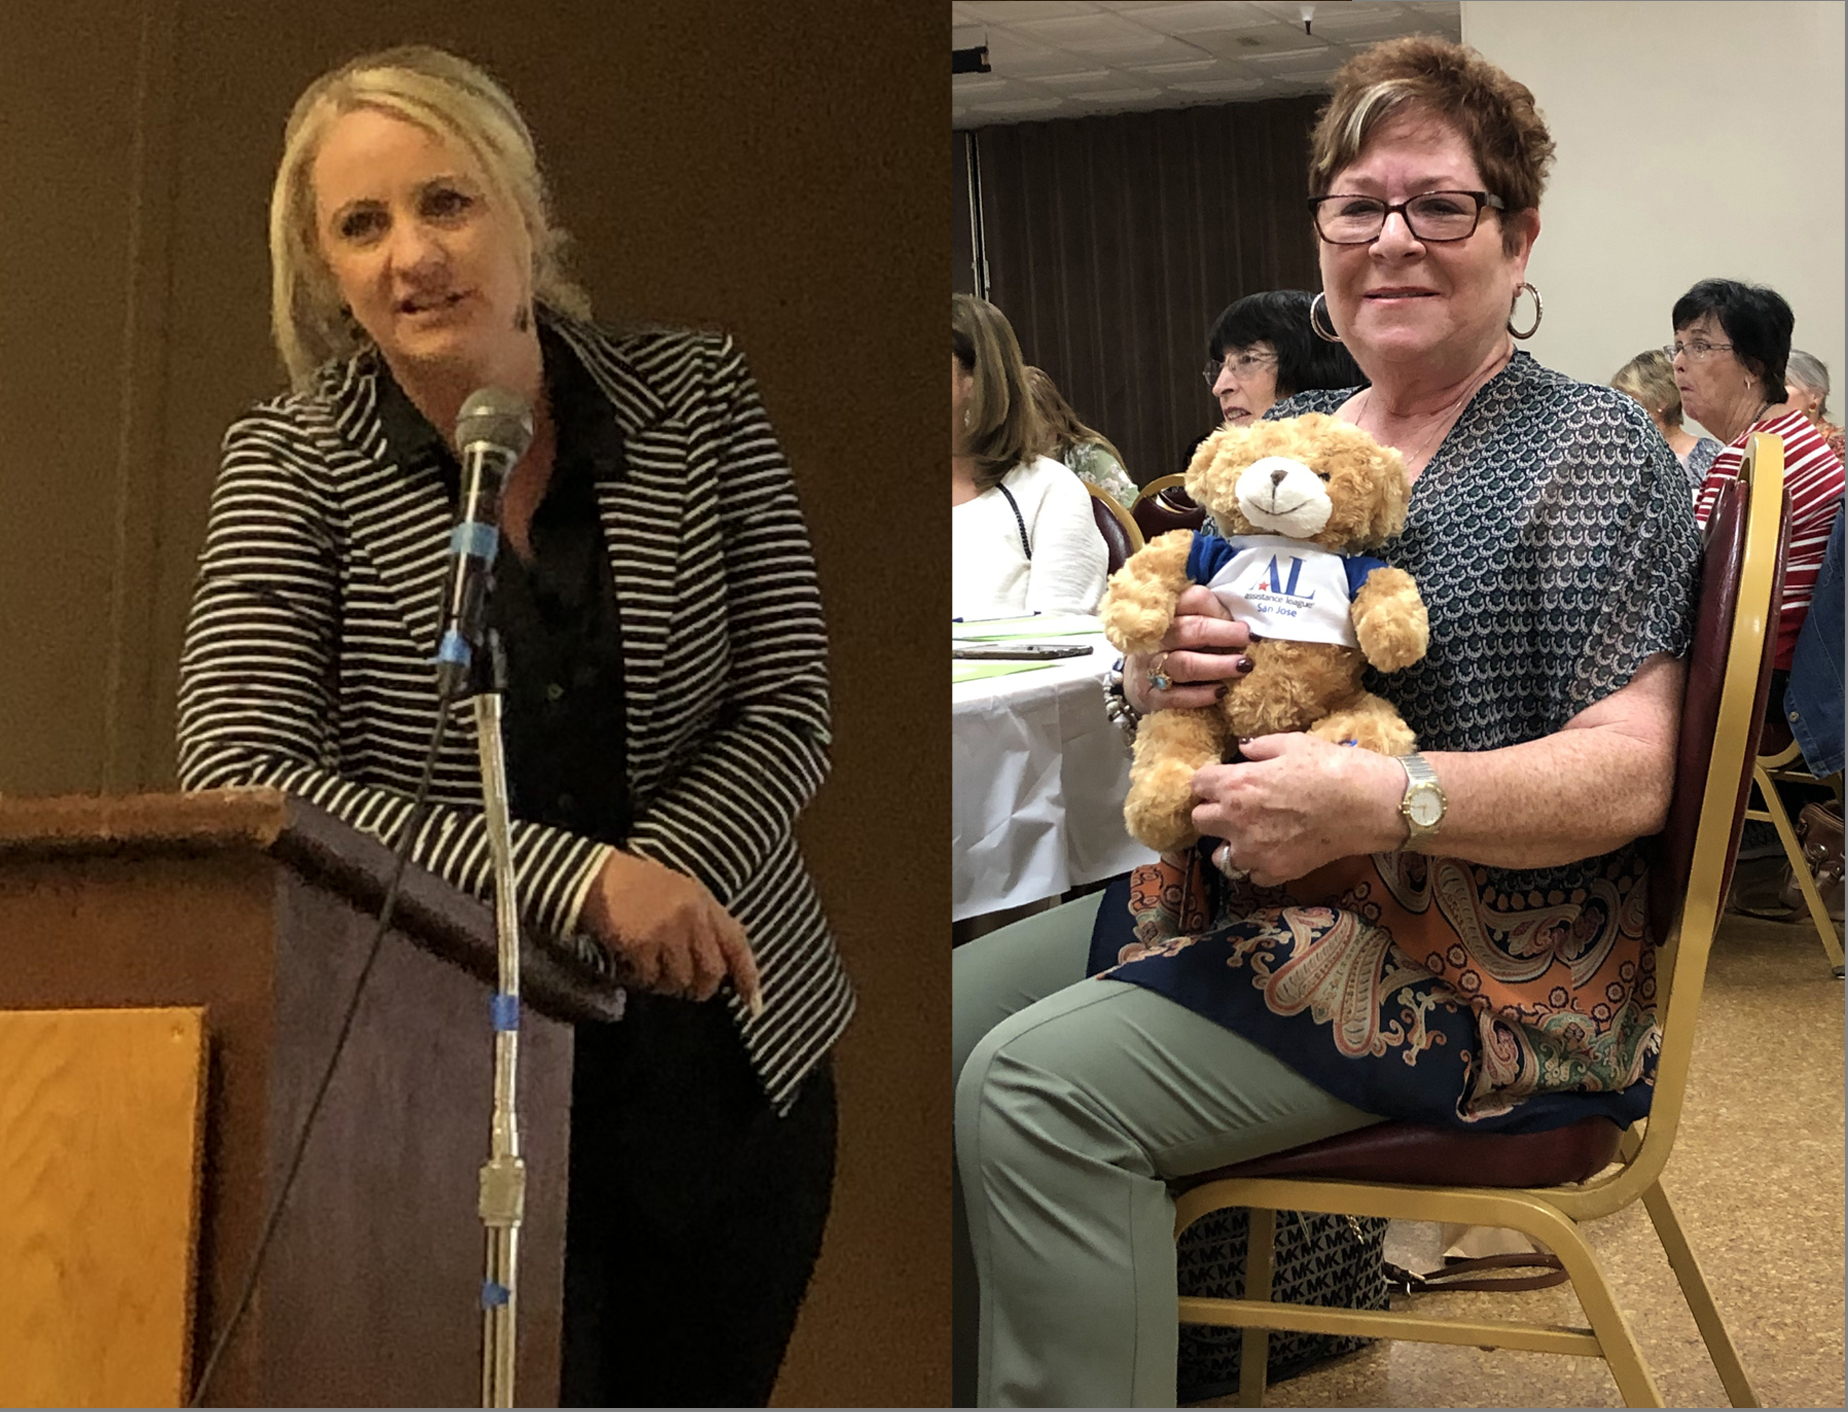 Split photo - Judy Patten from Parisi House and volunteer with Hug-a-Bear